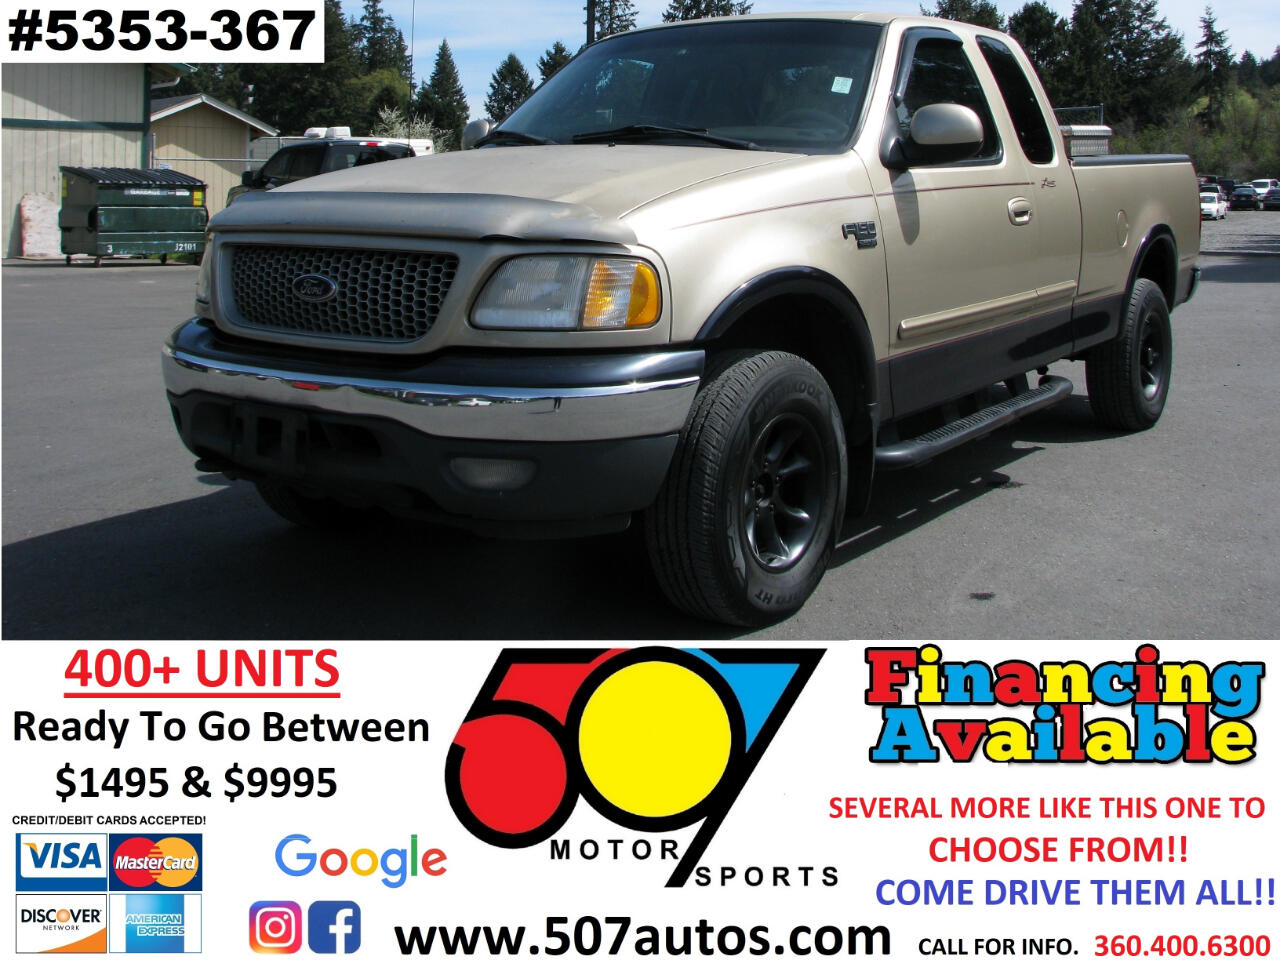 Used 1999 Ford F-150 Supercab 139" 4WD Lariat for Sale in Roy WA 98580 1999 Ford F150 4.6 Towing Capacity